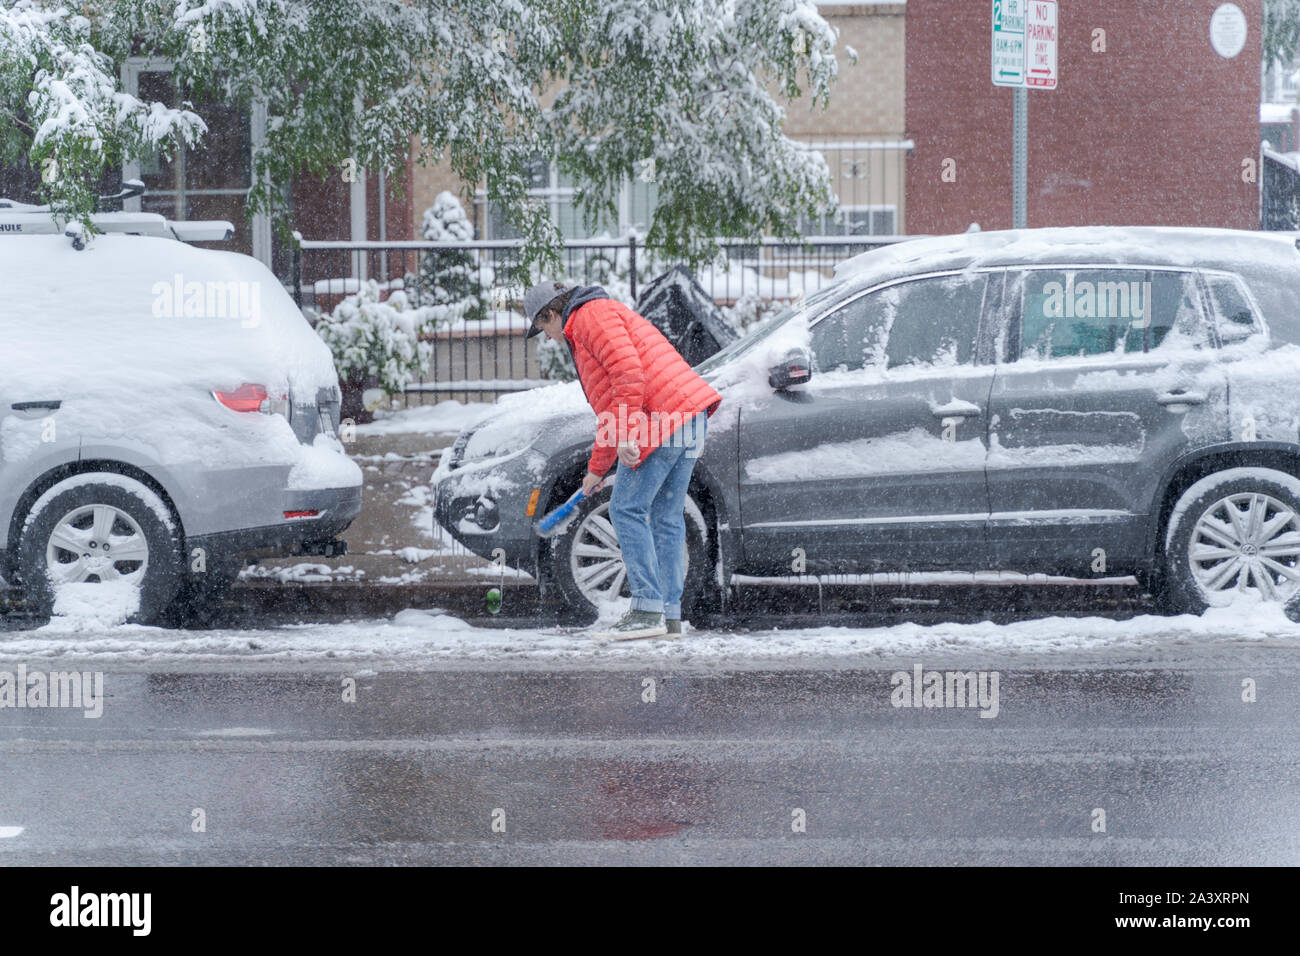 Denver, Colorado, USA- October 10, 2019: Man cleans snow from car during Denver's first snow storm of the season. Stock Photo